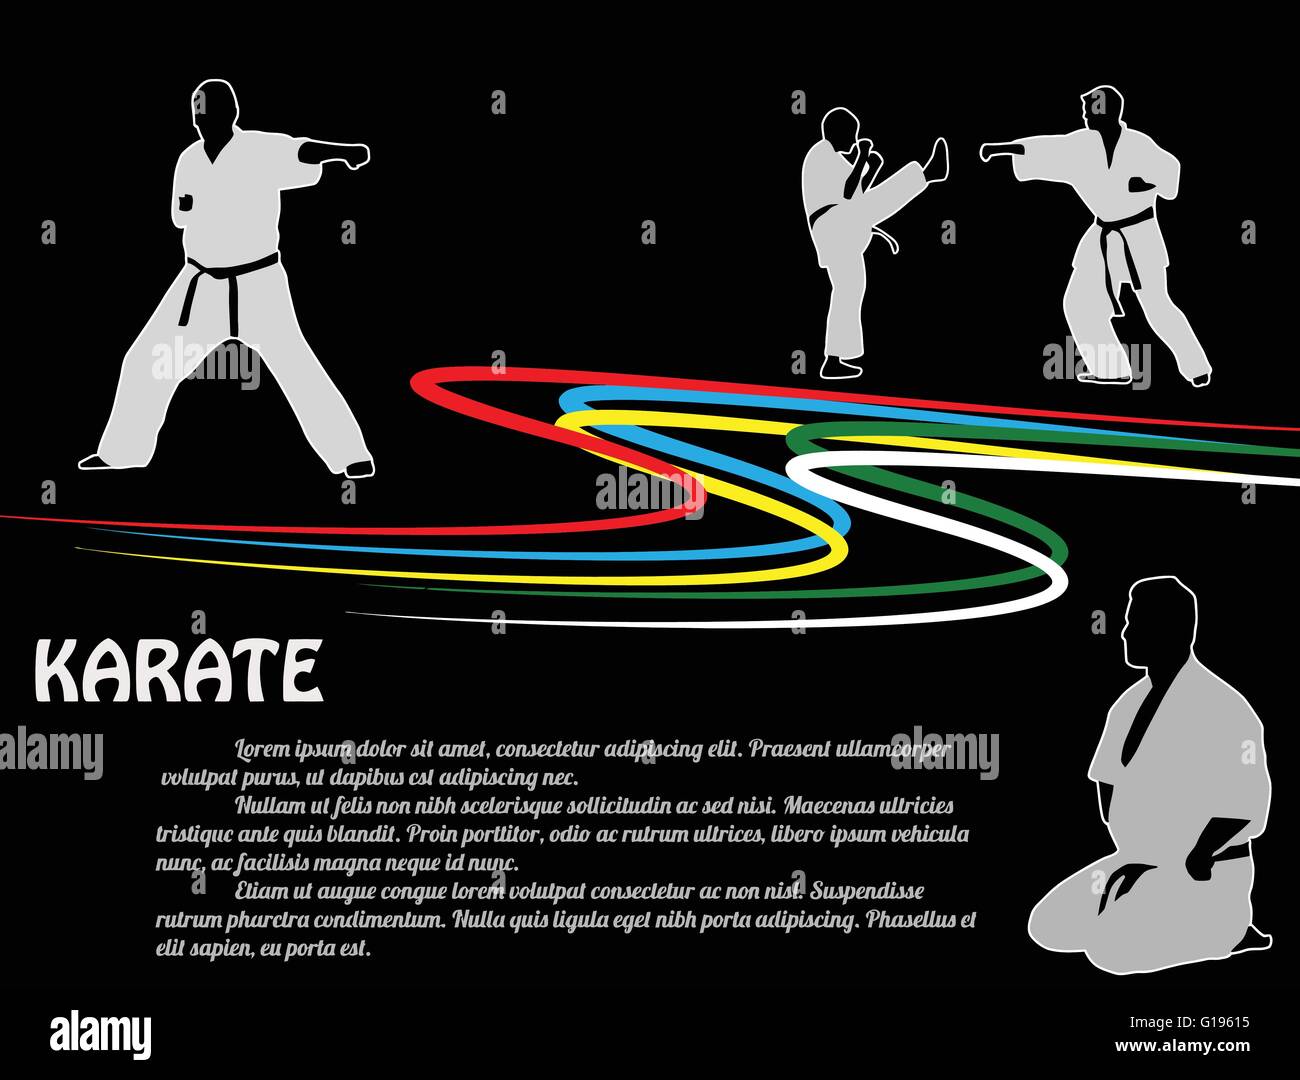 Karate poster background with fighters silhouettes on black, vector illustration Stock Vector